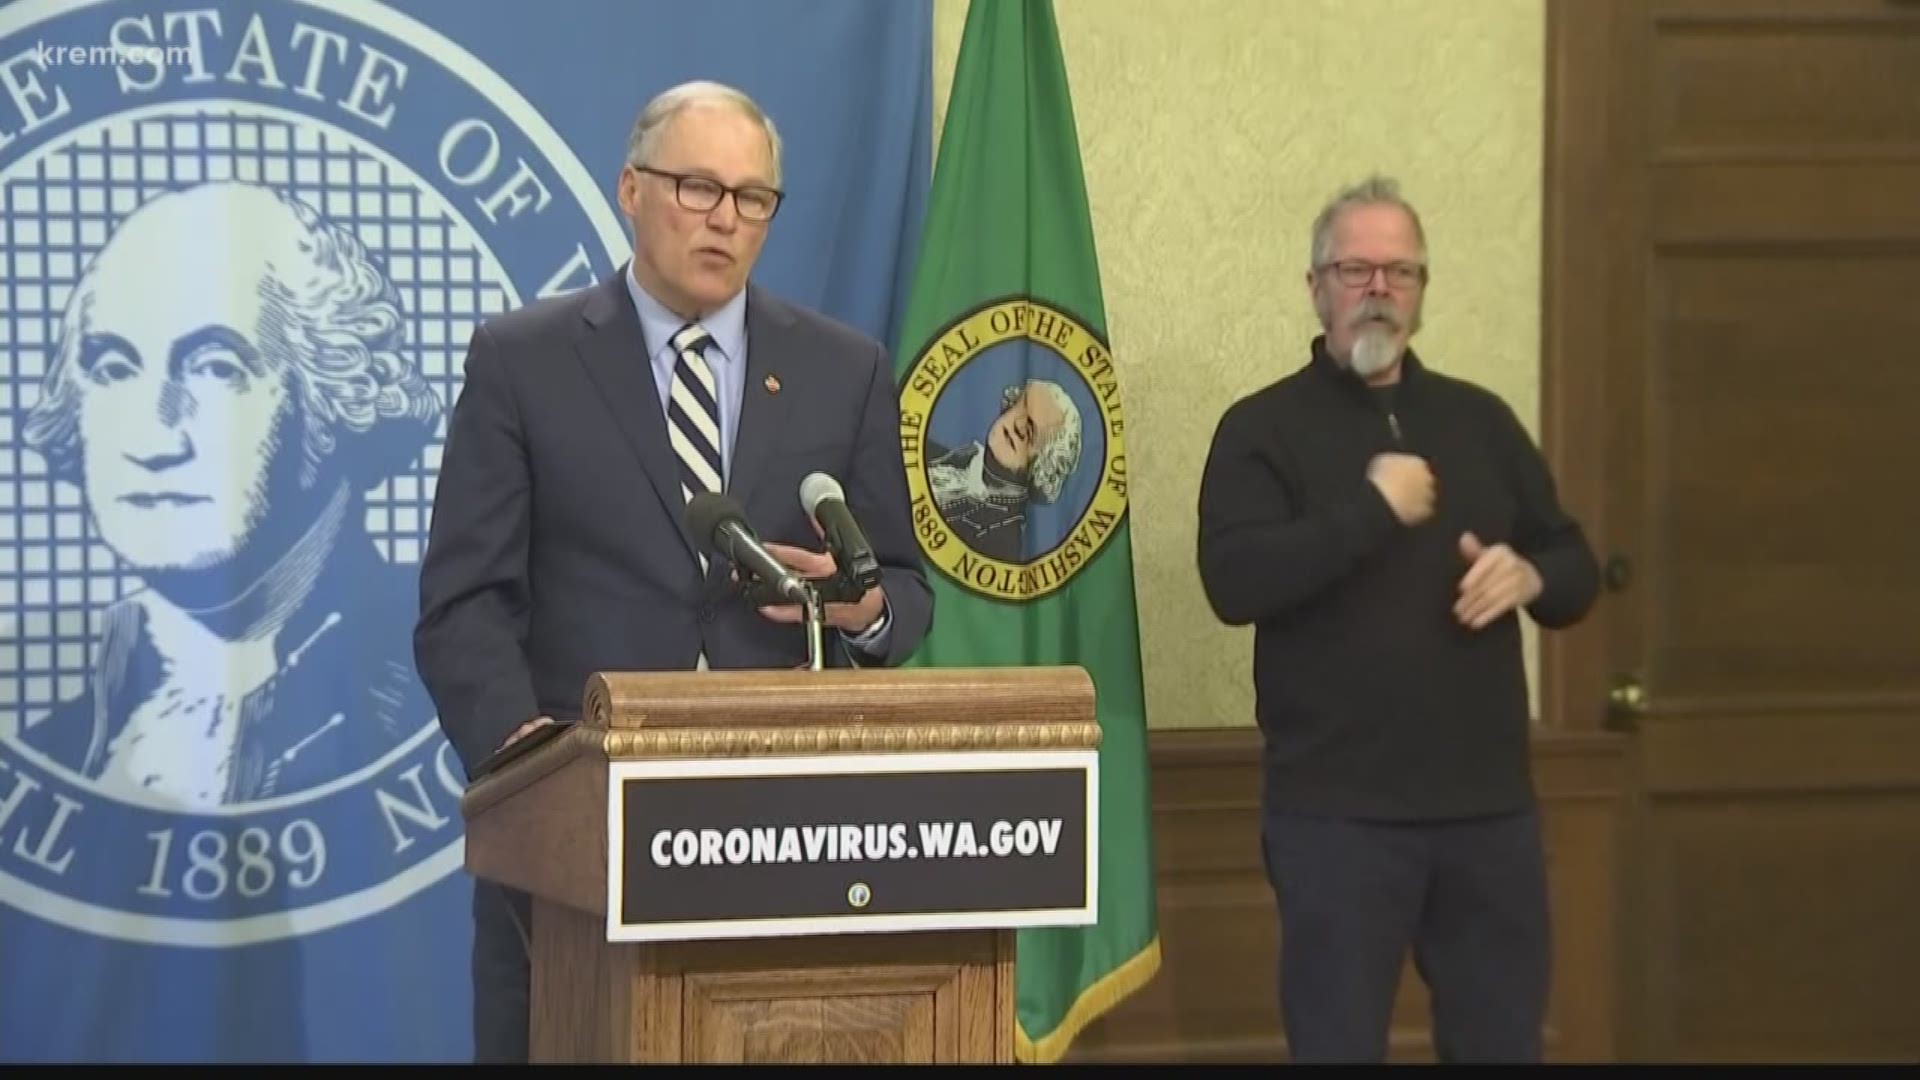 A letter from Inslee's office says the commissioners' resolution "intentionally and knowingly" violates the stay-at-home order, and therefore violates state law.